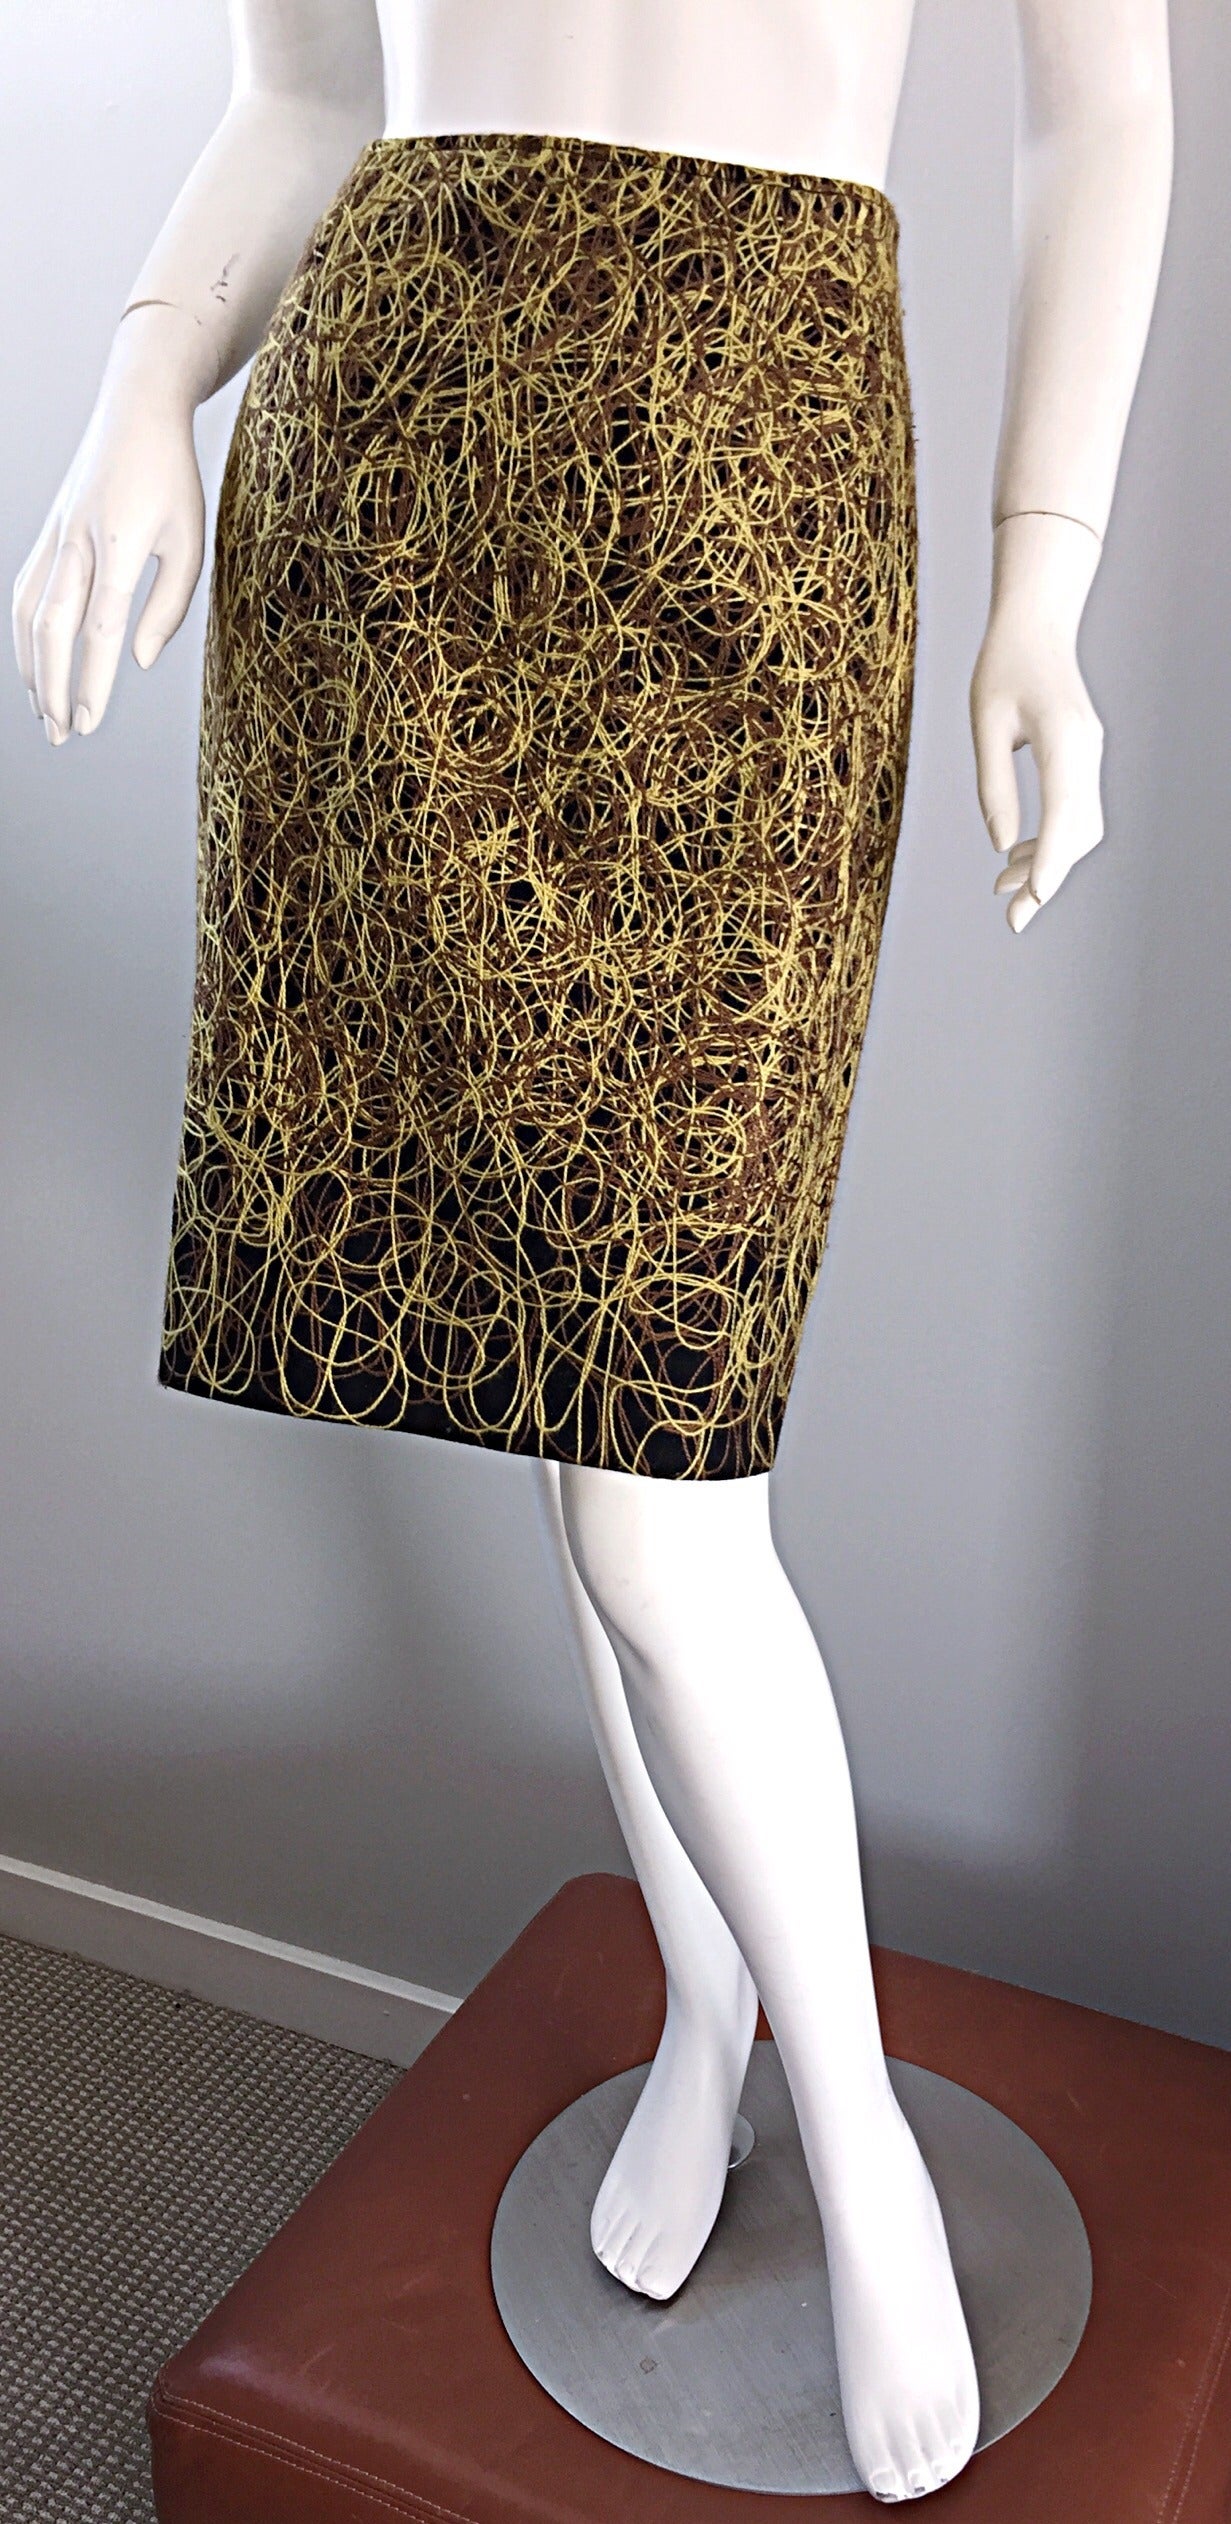 Awesome vintage Jean-Charles de Castelbajac high waisted pencil skirt! Intricate embroidery, featuring yarns of yellow and brown that form a scribble print throughout the skirt. SO much detail to this form fitting wool skirt! Can easily be dressed